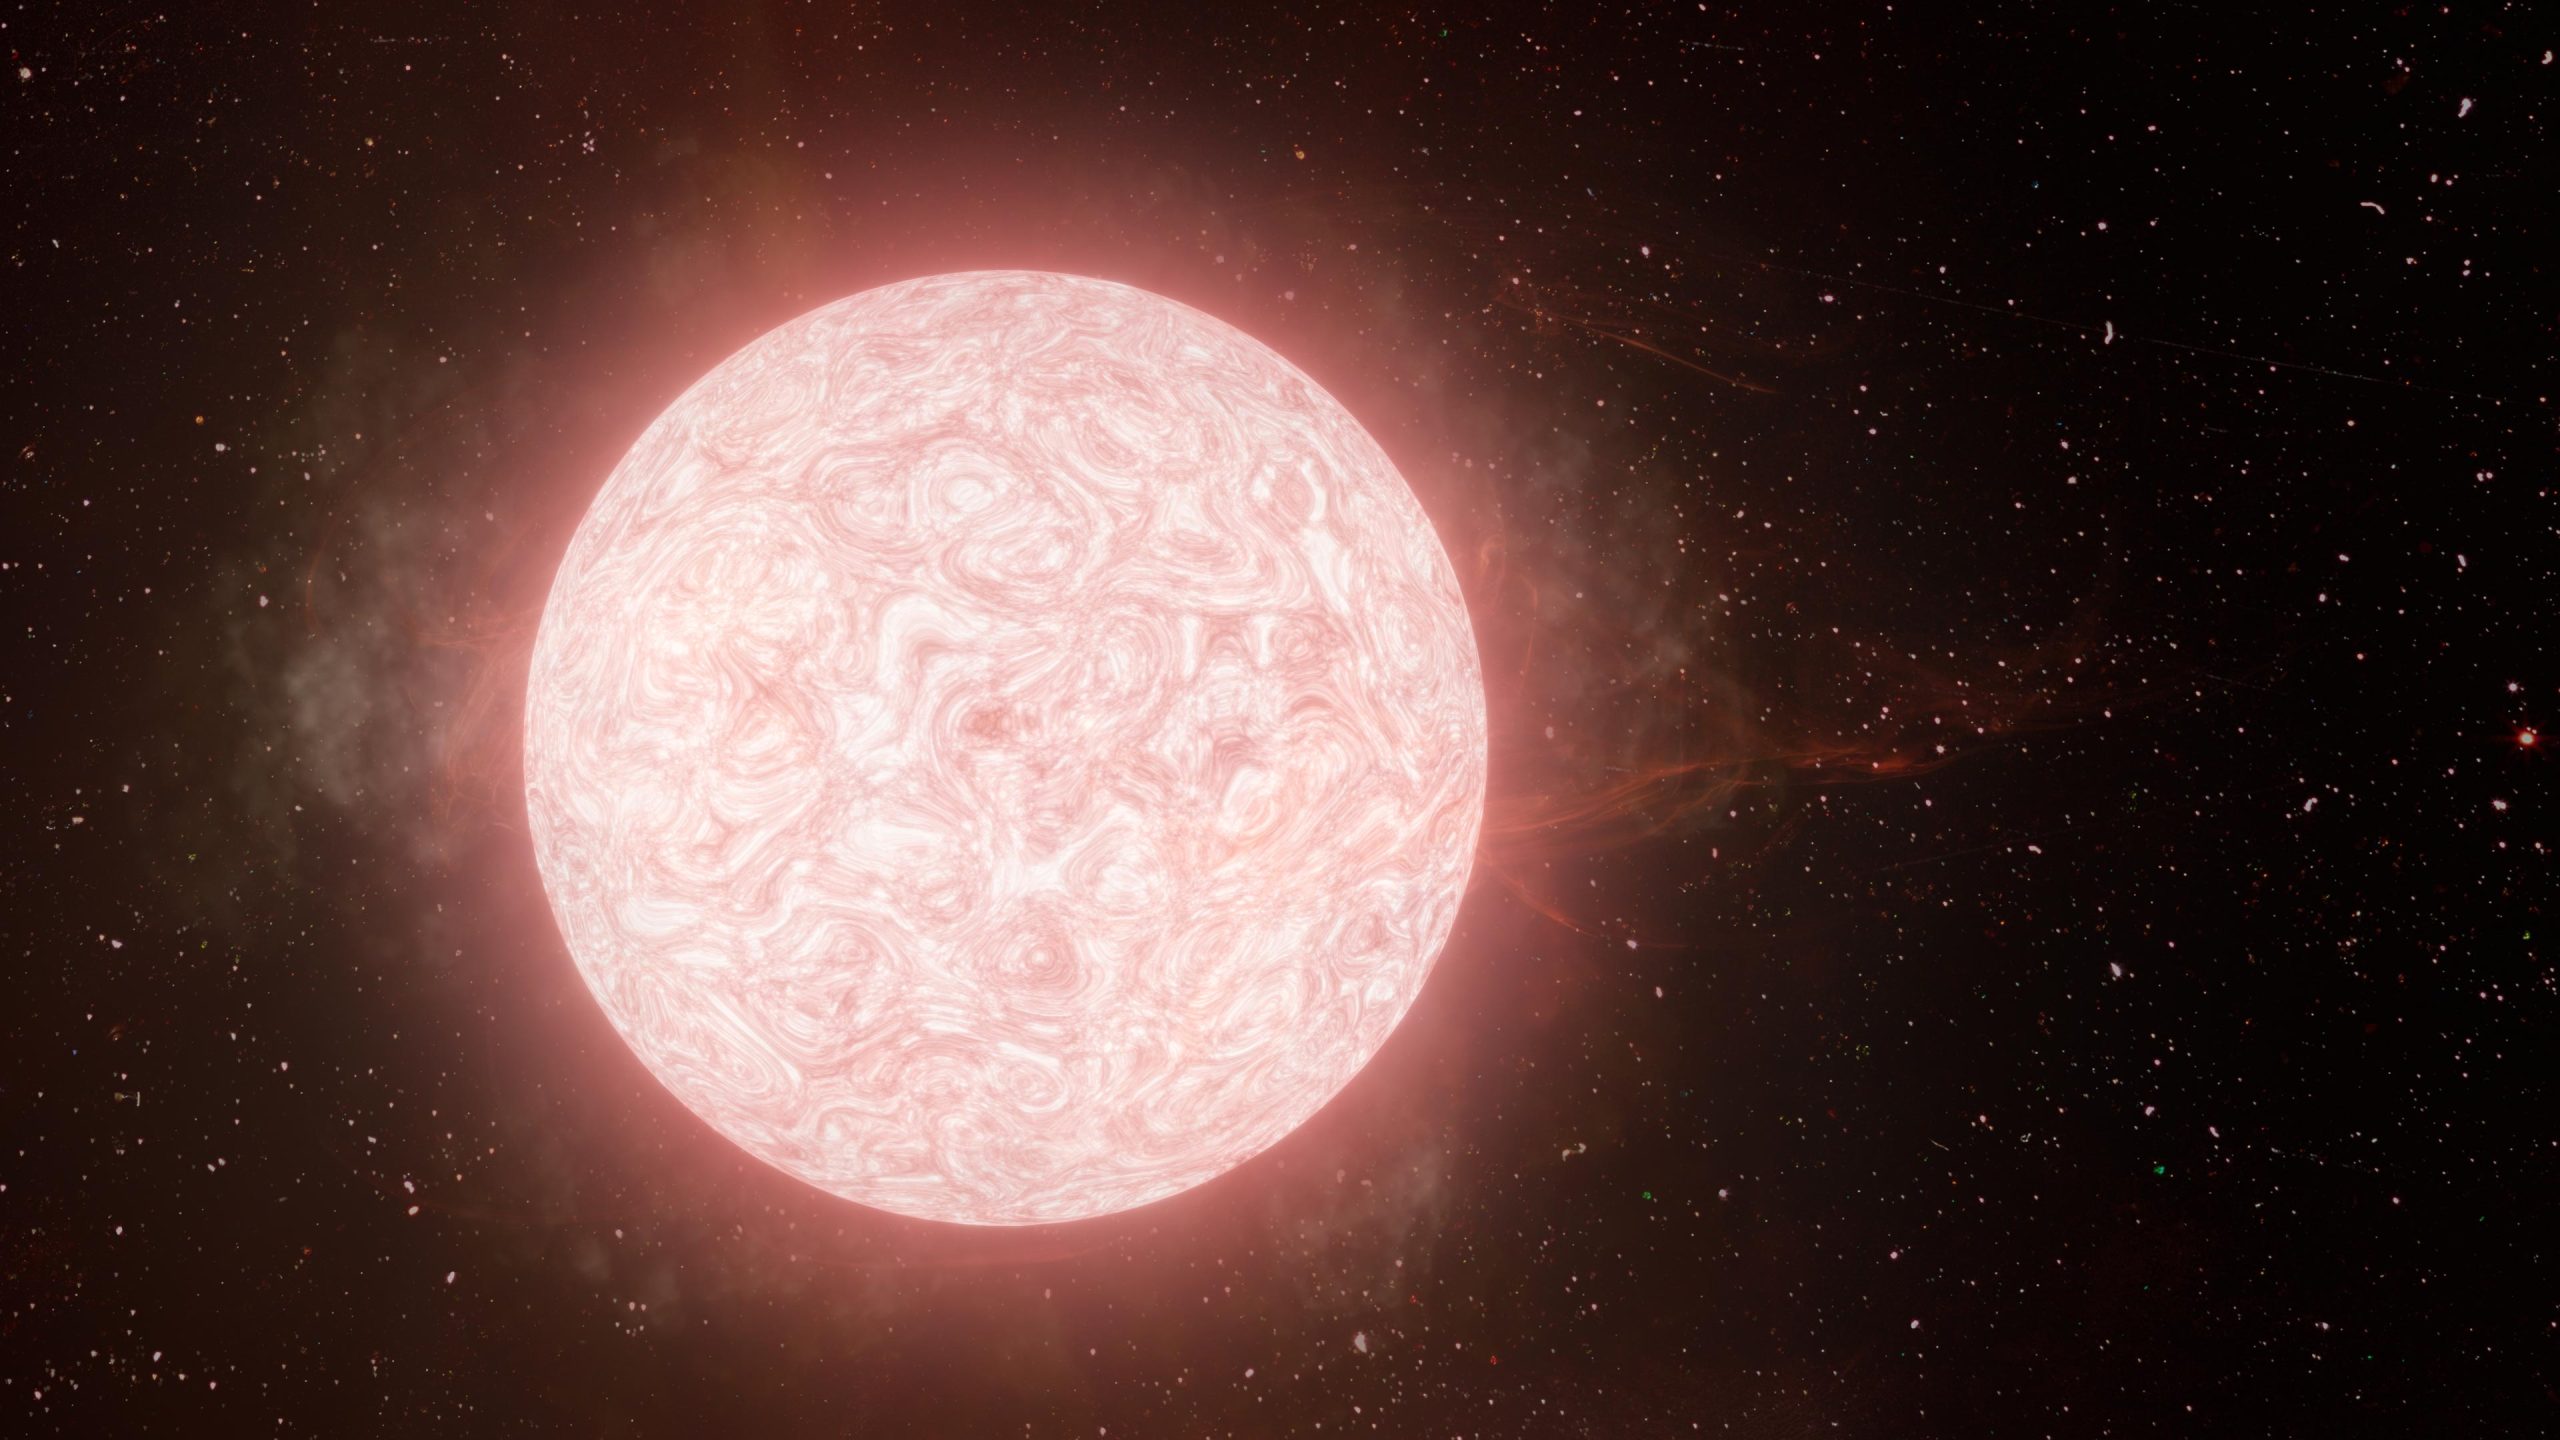 red supergiant star in the final year of its life emitting a tumultuous cloud of gas.